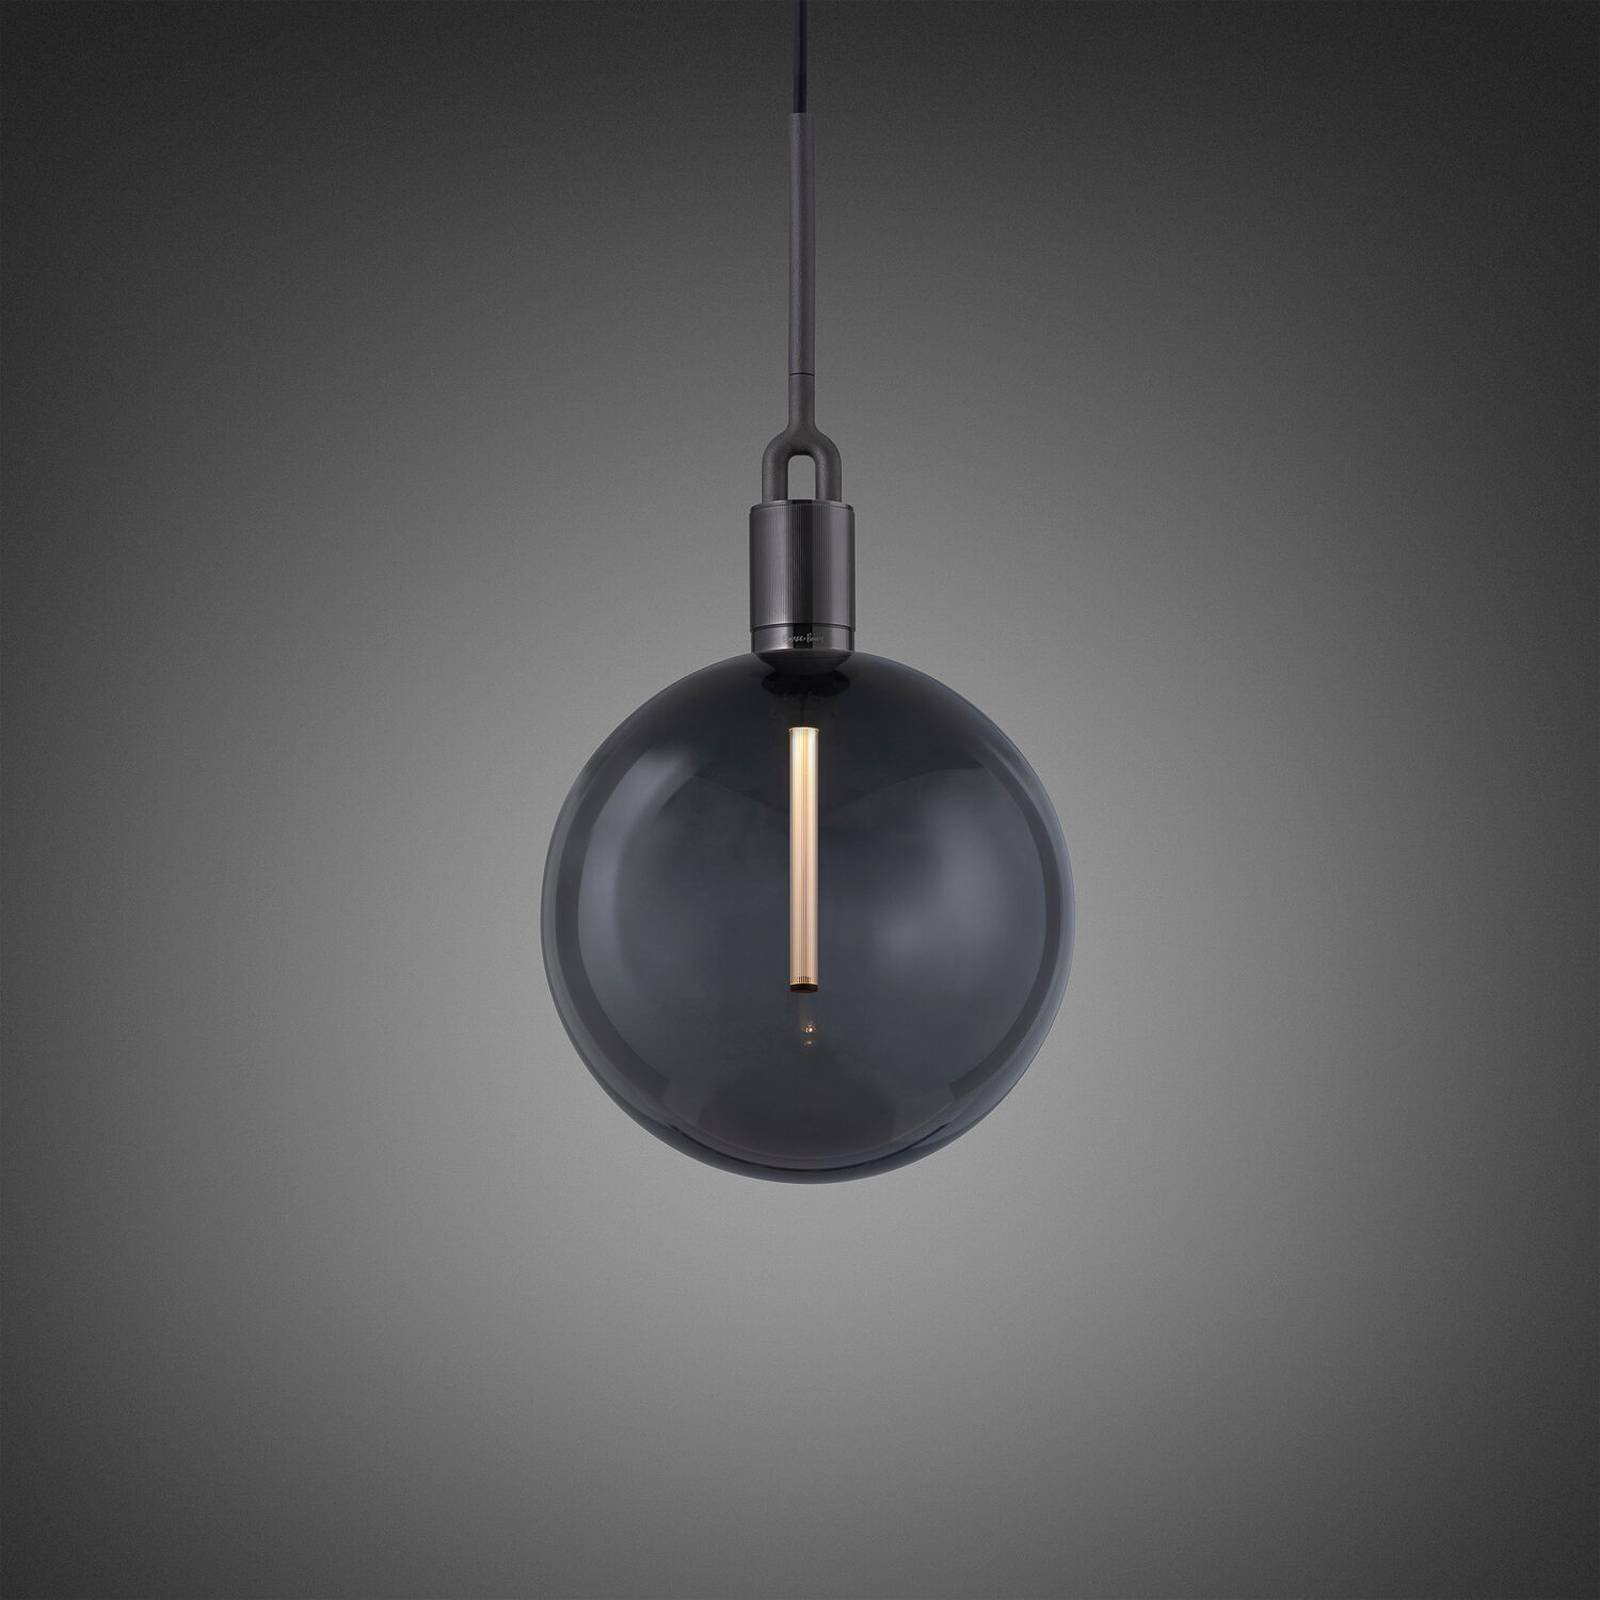 Image of Buster + Punch Forked pendule Ø 29cm gunmetal/rauch 